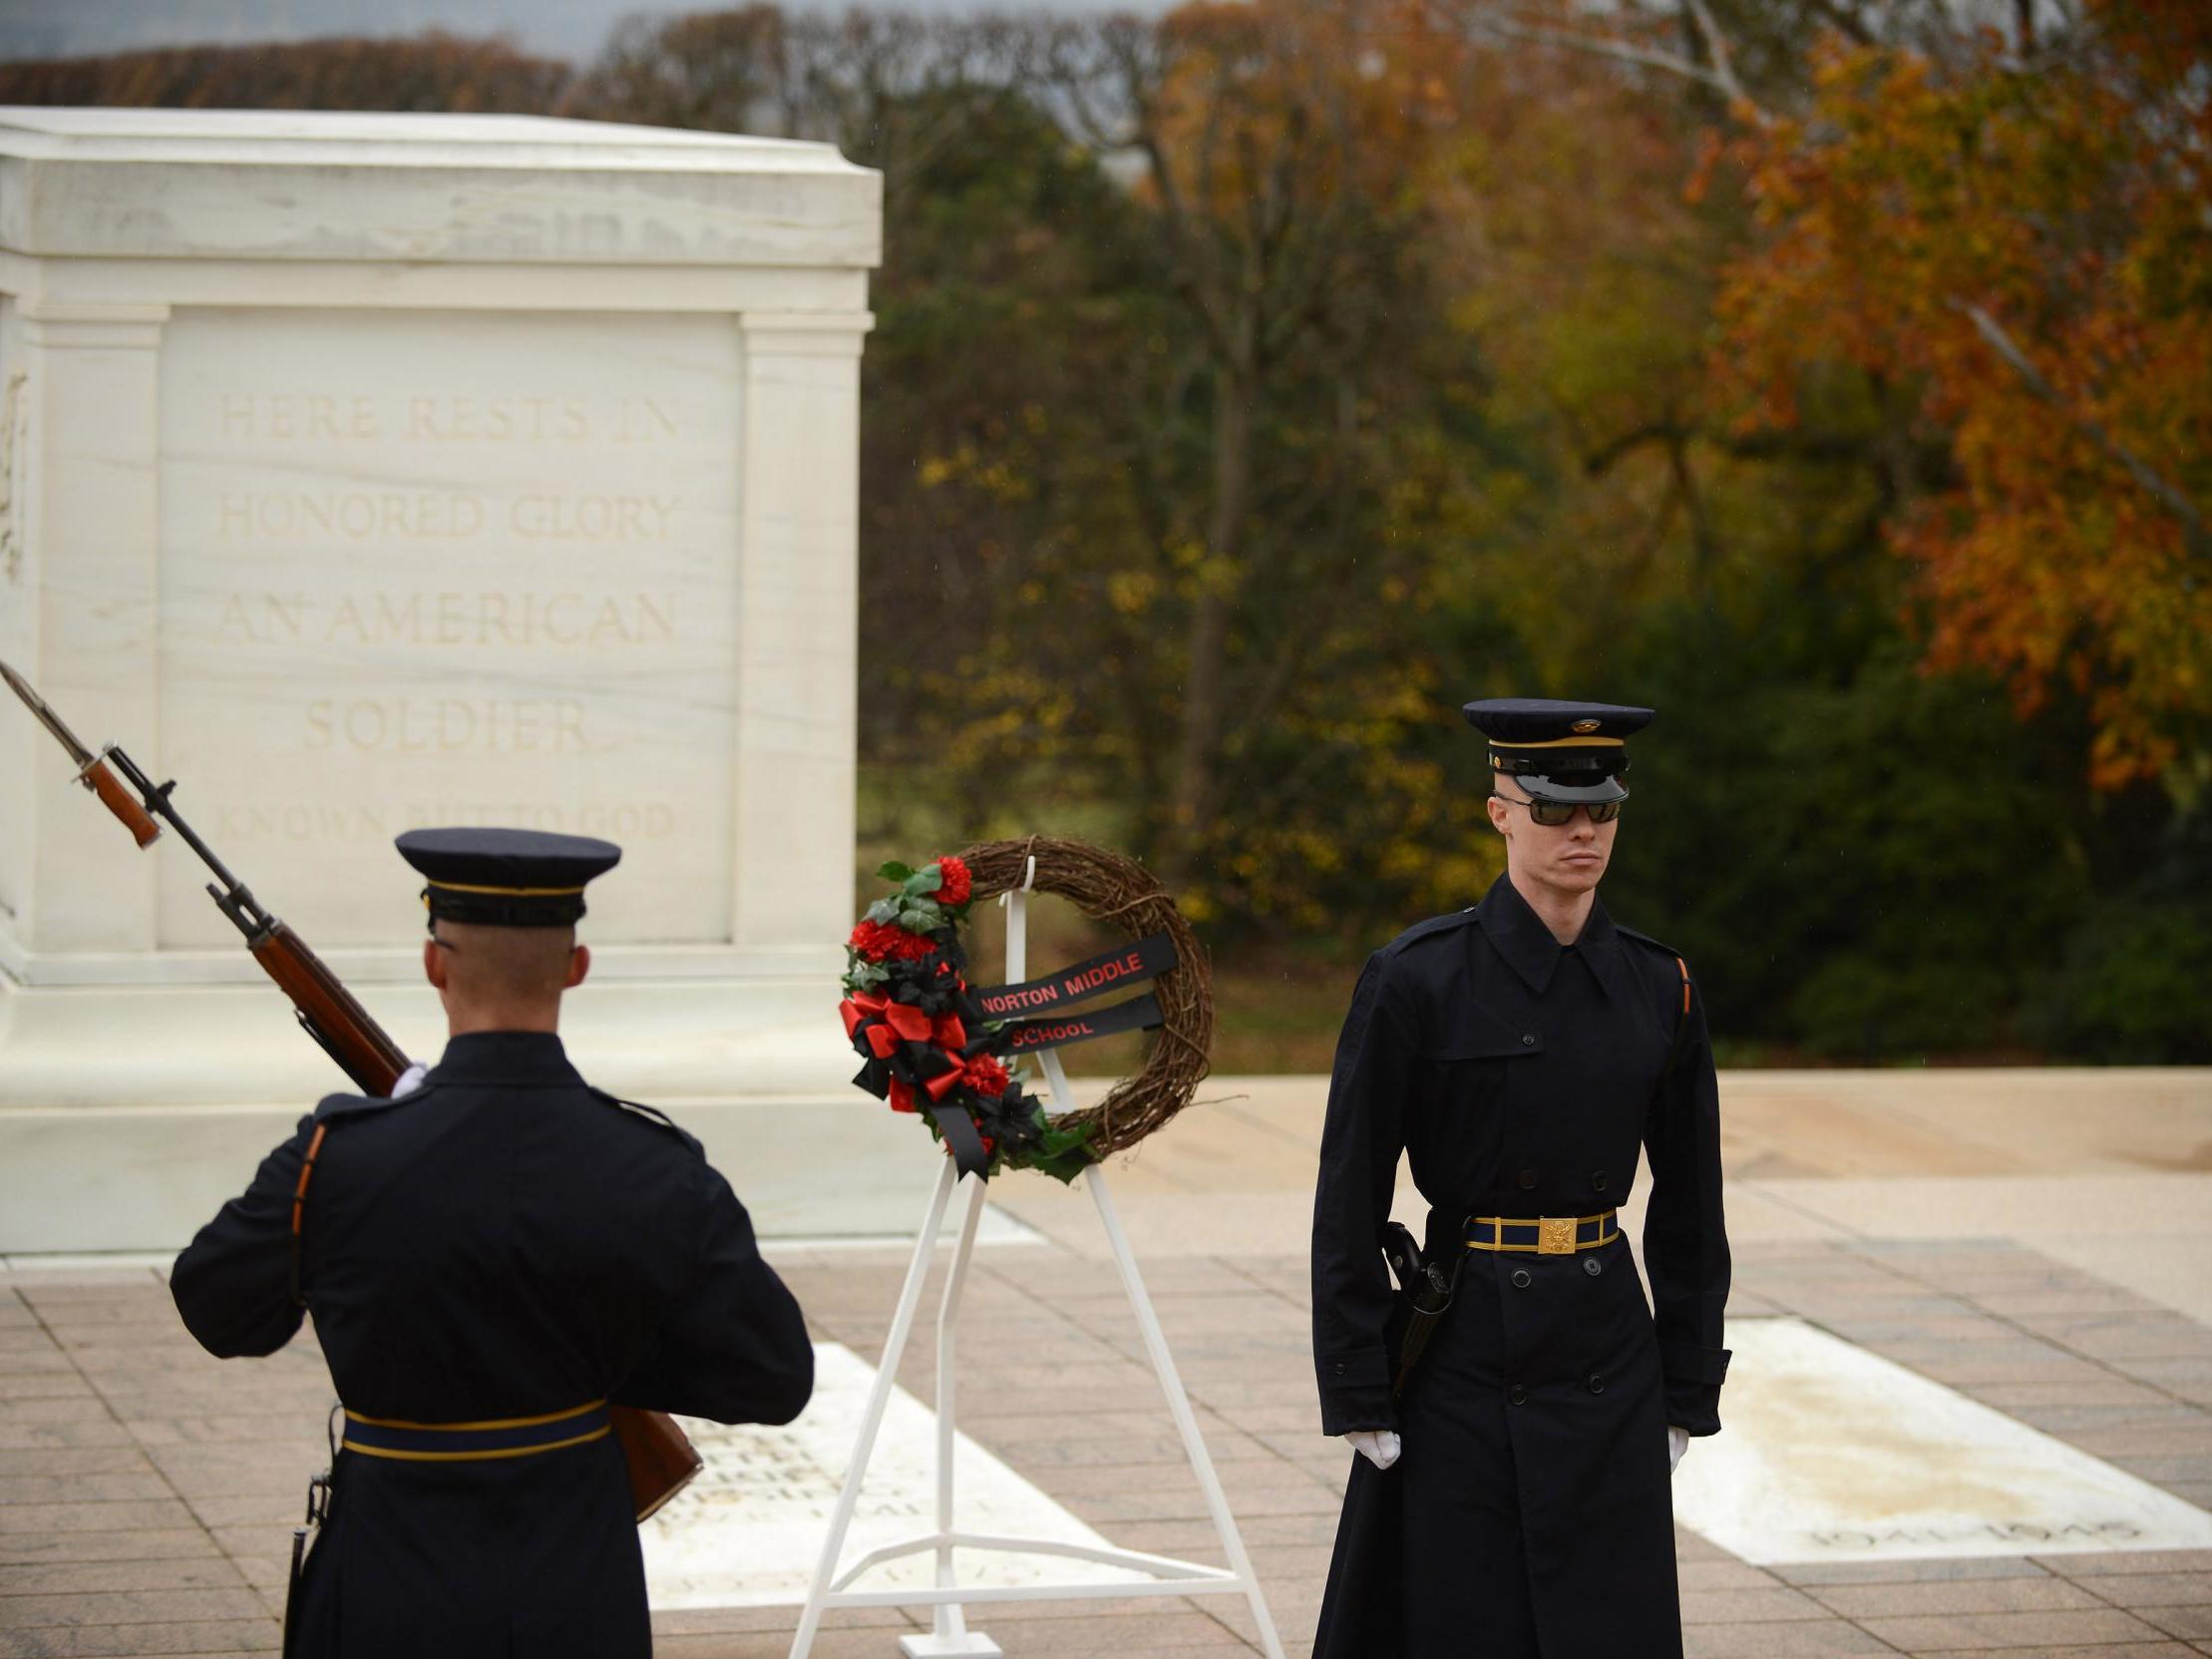 Honour guards patrol the Tomb of the Unknown Soldier at Arlington National Cemetery in Arlington, Virginia, on Friday. (Astrid Riecken /